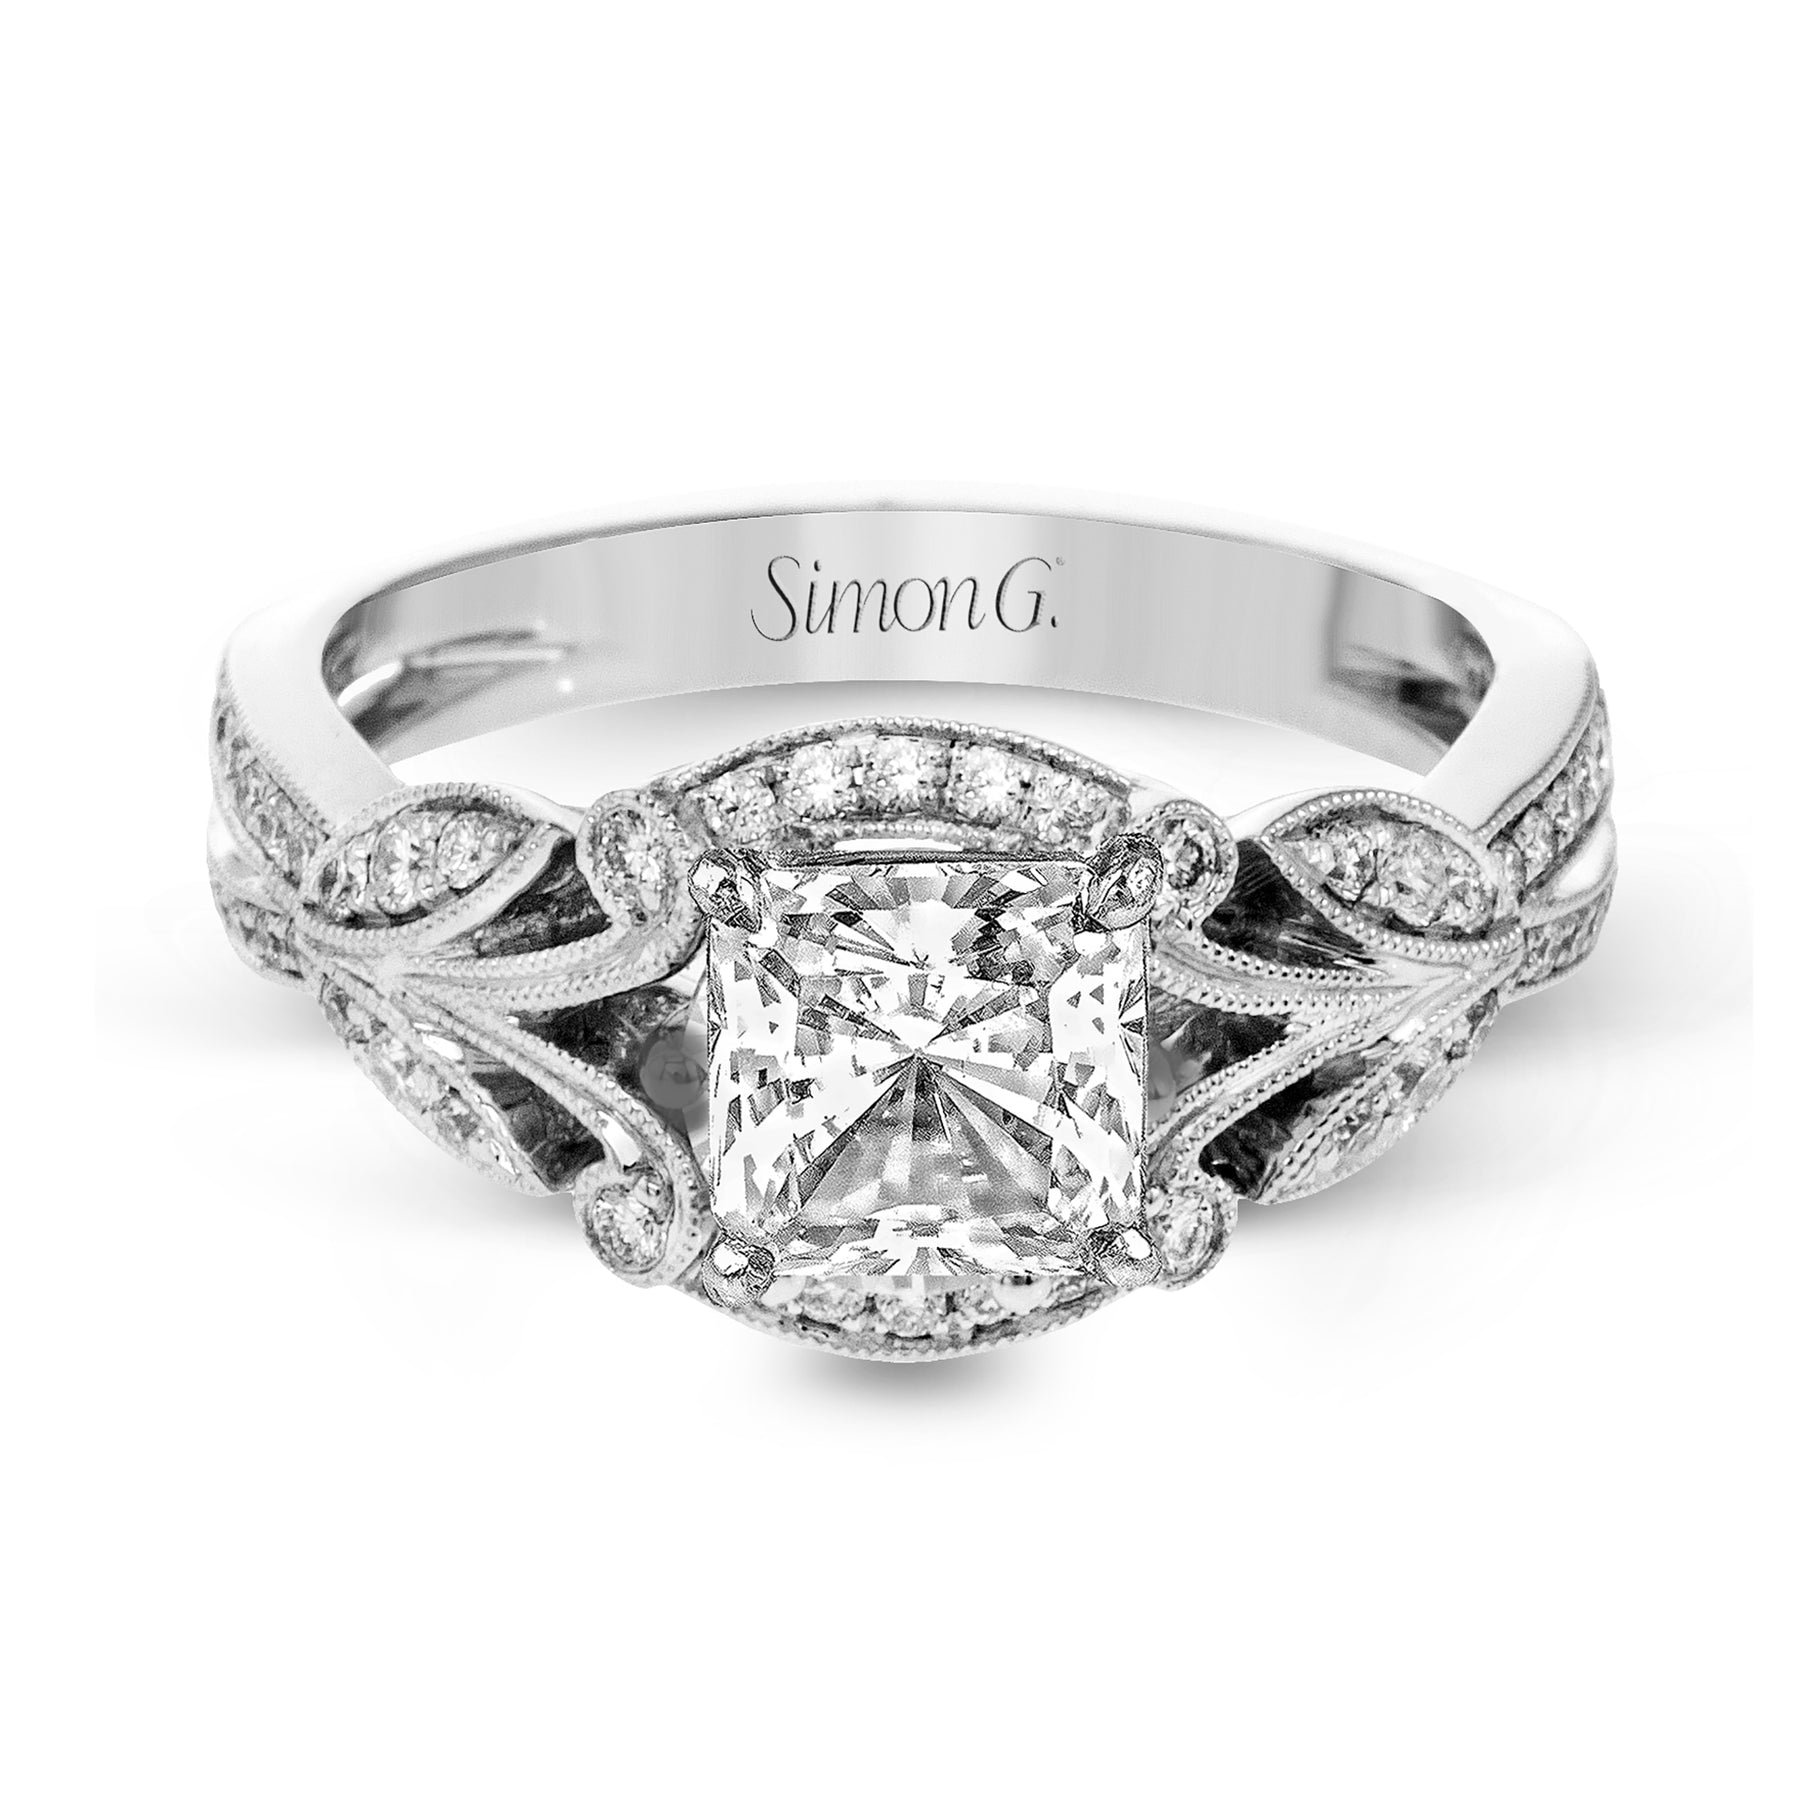 Princess-Cut Halo Engagement Ring In 18k Gold With Diamonds TR629-PC